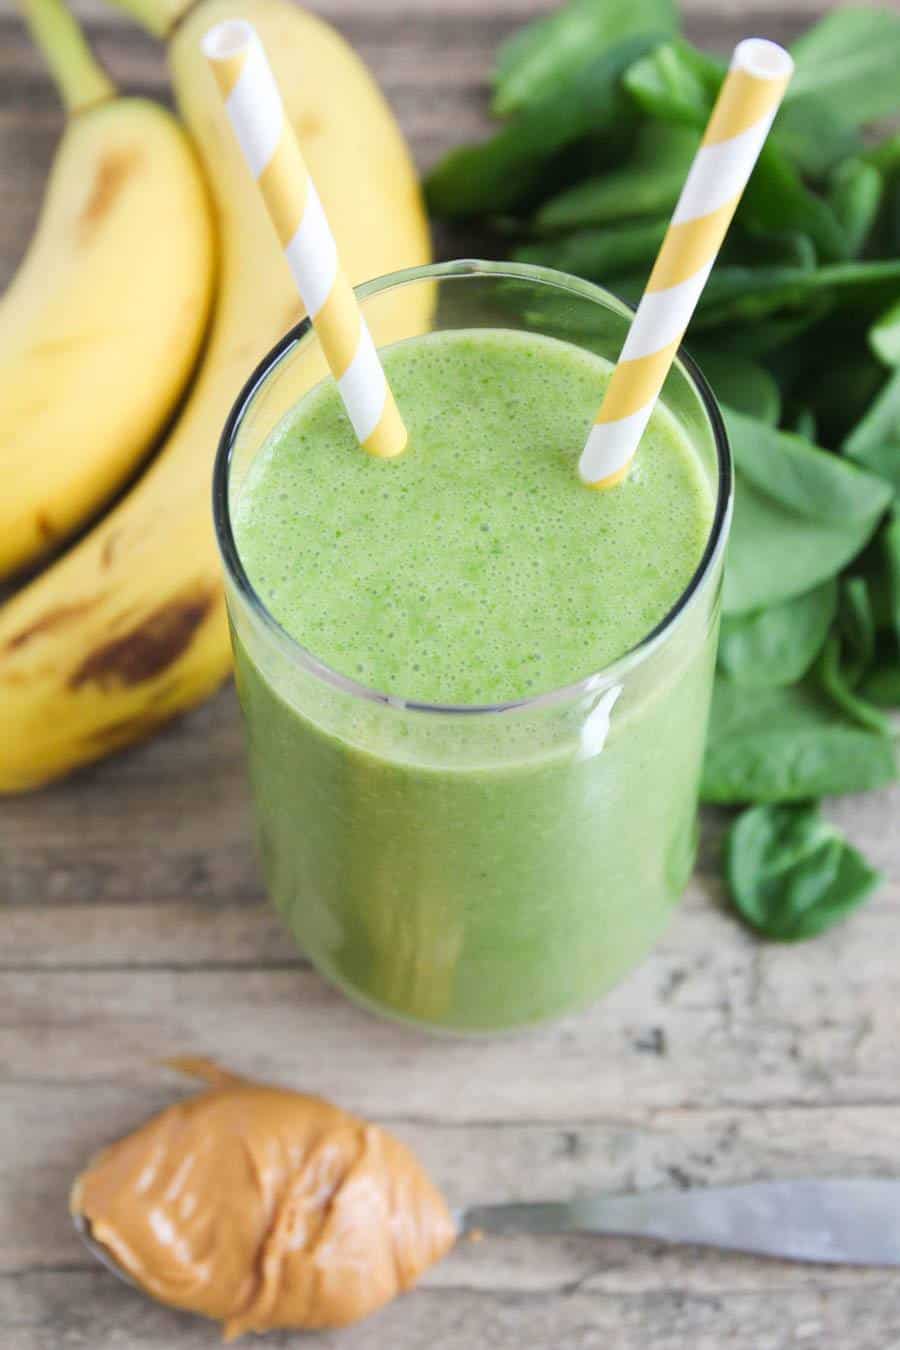 12 Feel-Good Juices and Smoothies to Make at Home - Goodtaste with Tanji